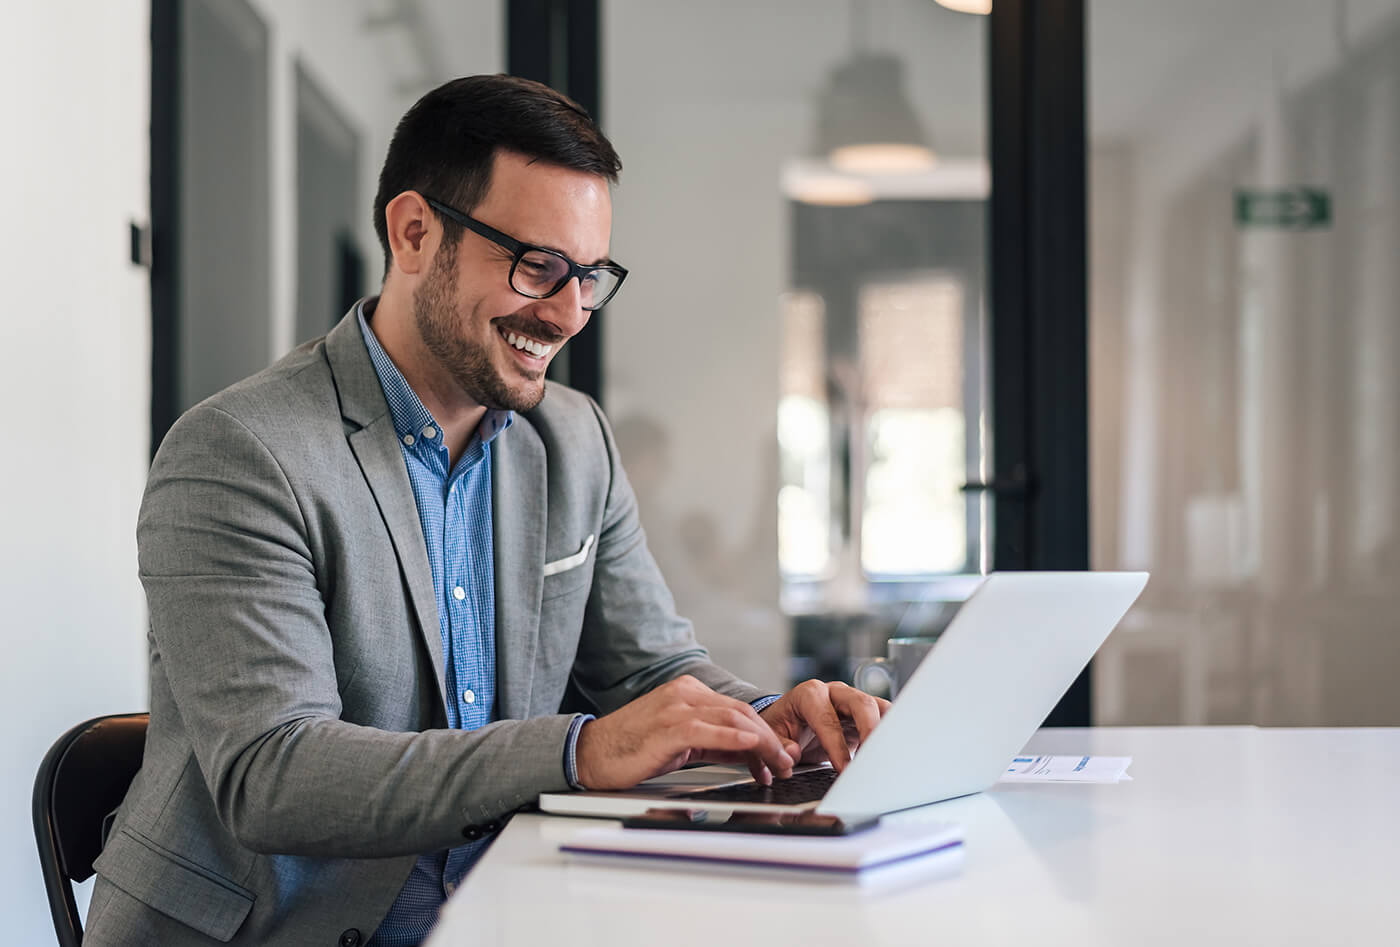 Smiling man in glasses with replacement occupational lenses works on laptop in office